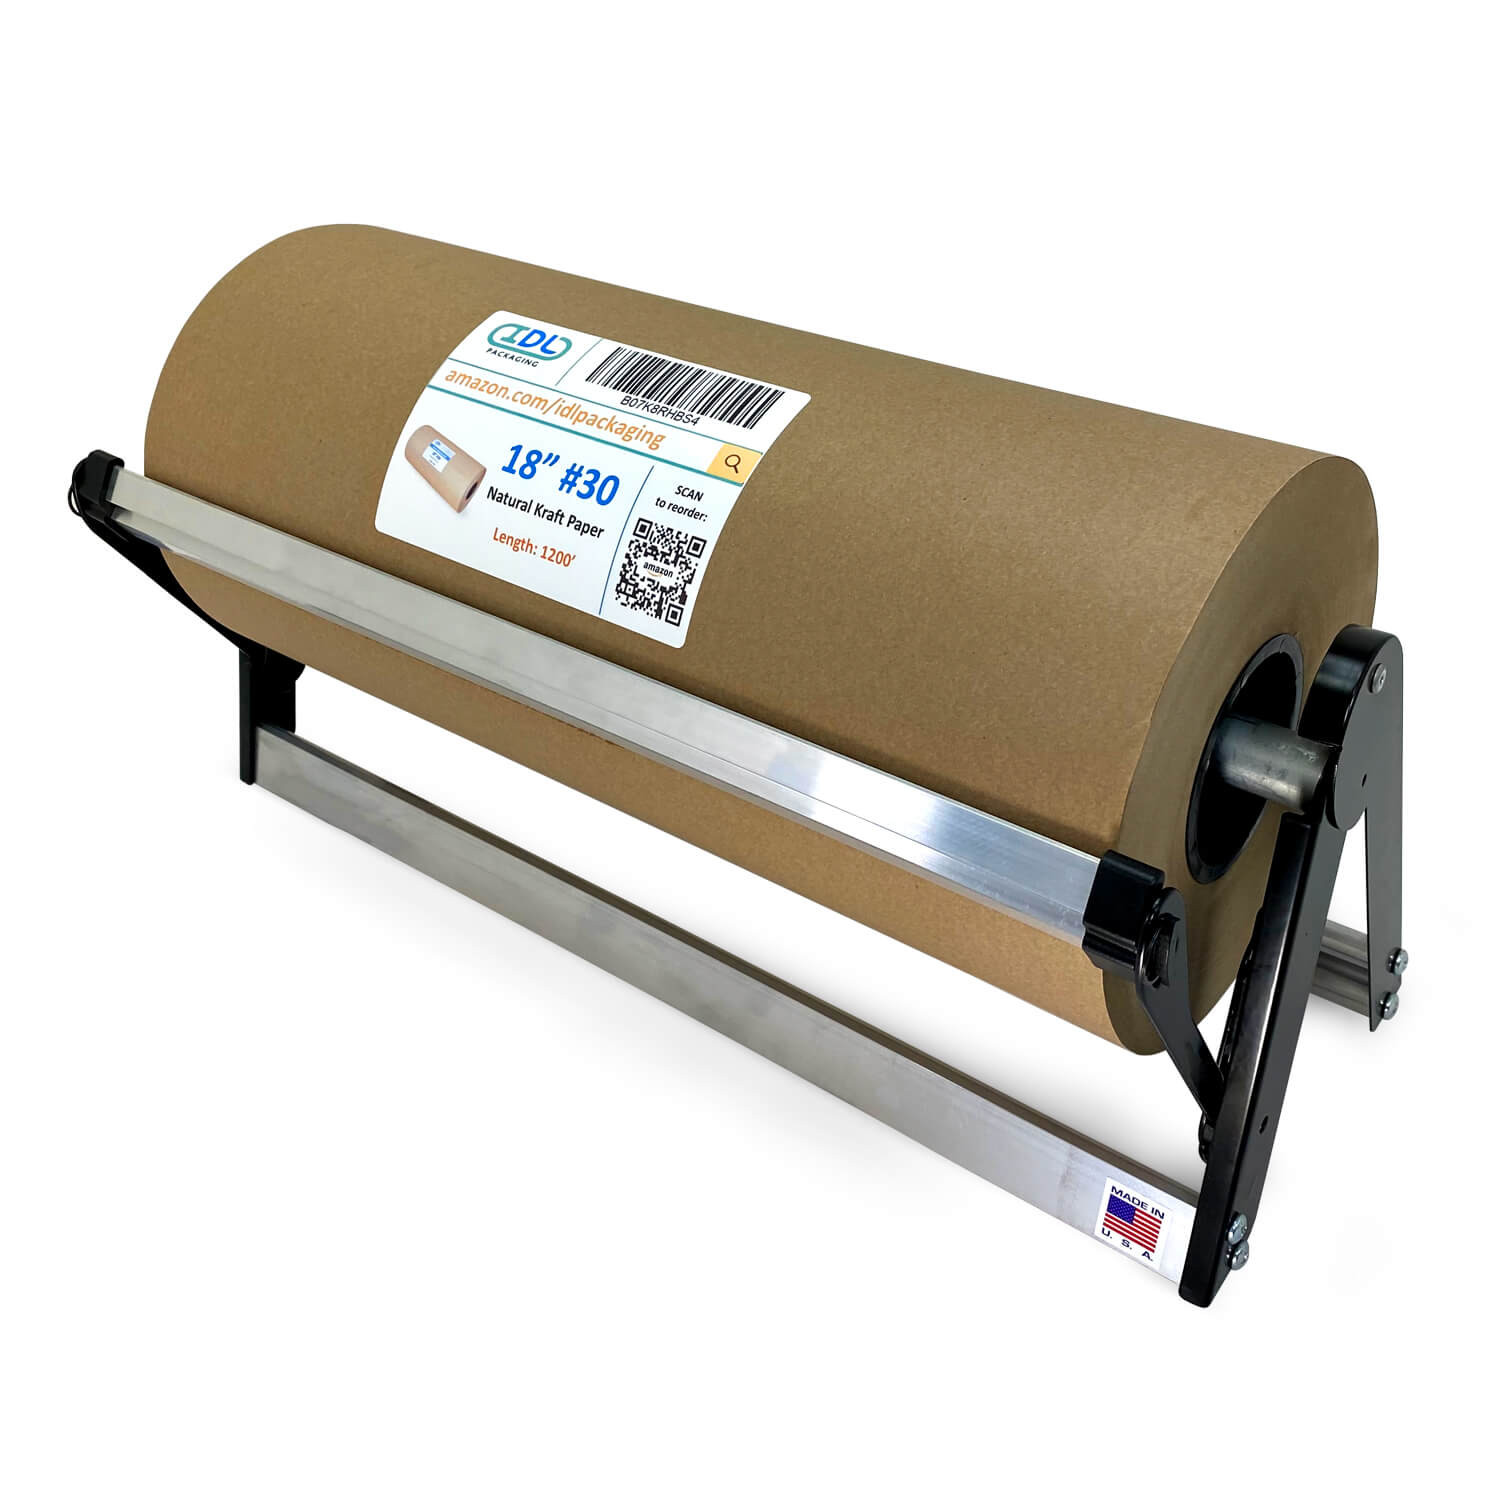 https://idlpack.com/image/cache/catalog/Products/Kraft-Paper/PD-18/Durable-Kraft-and-Butcher-Paper-Dispenser-Cutter-for-up-to-18-and-10-Diameter-Rolls-5-1500x1500.jpg